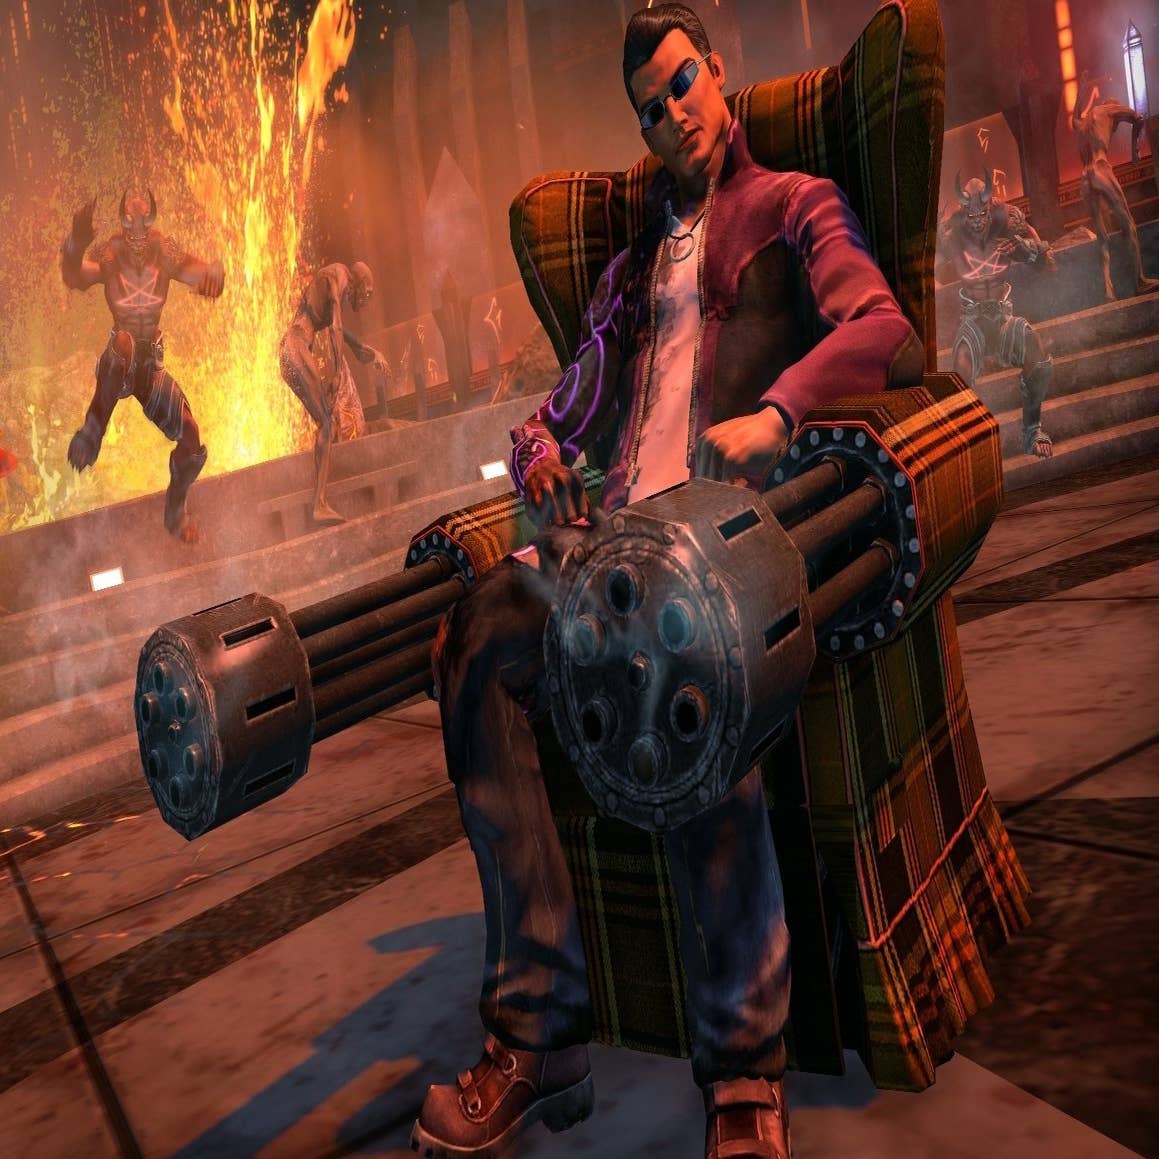 First time playing through a Saints Row game. Loving it so far